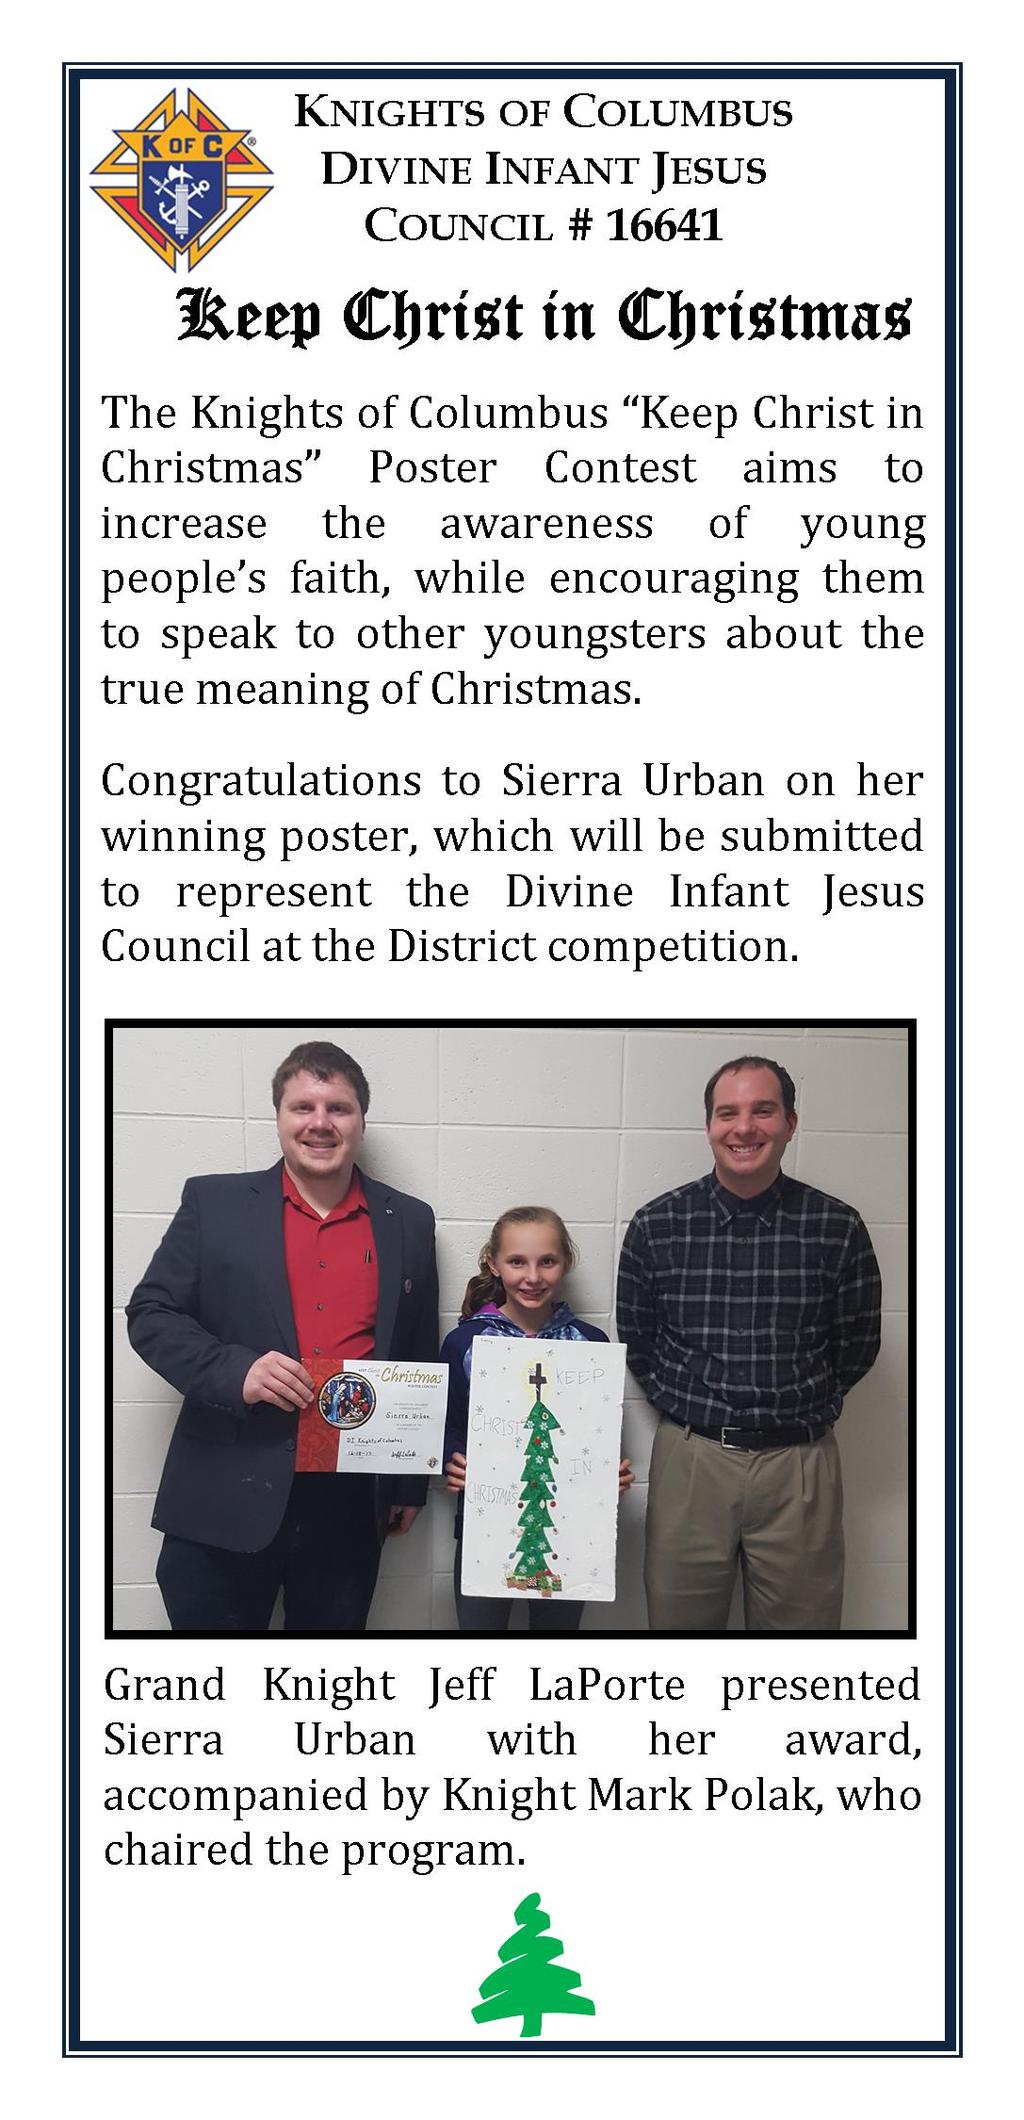 The Family Fully Alive program provides monthly themes, reflections, meditations, family projects and Scripture verses designed to help each family place God and the Catholic faith at the center of